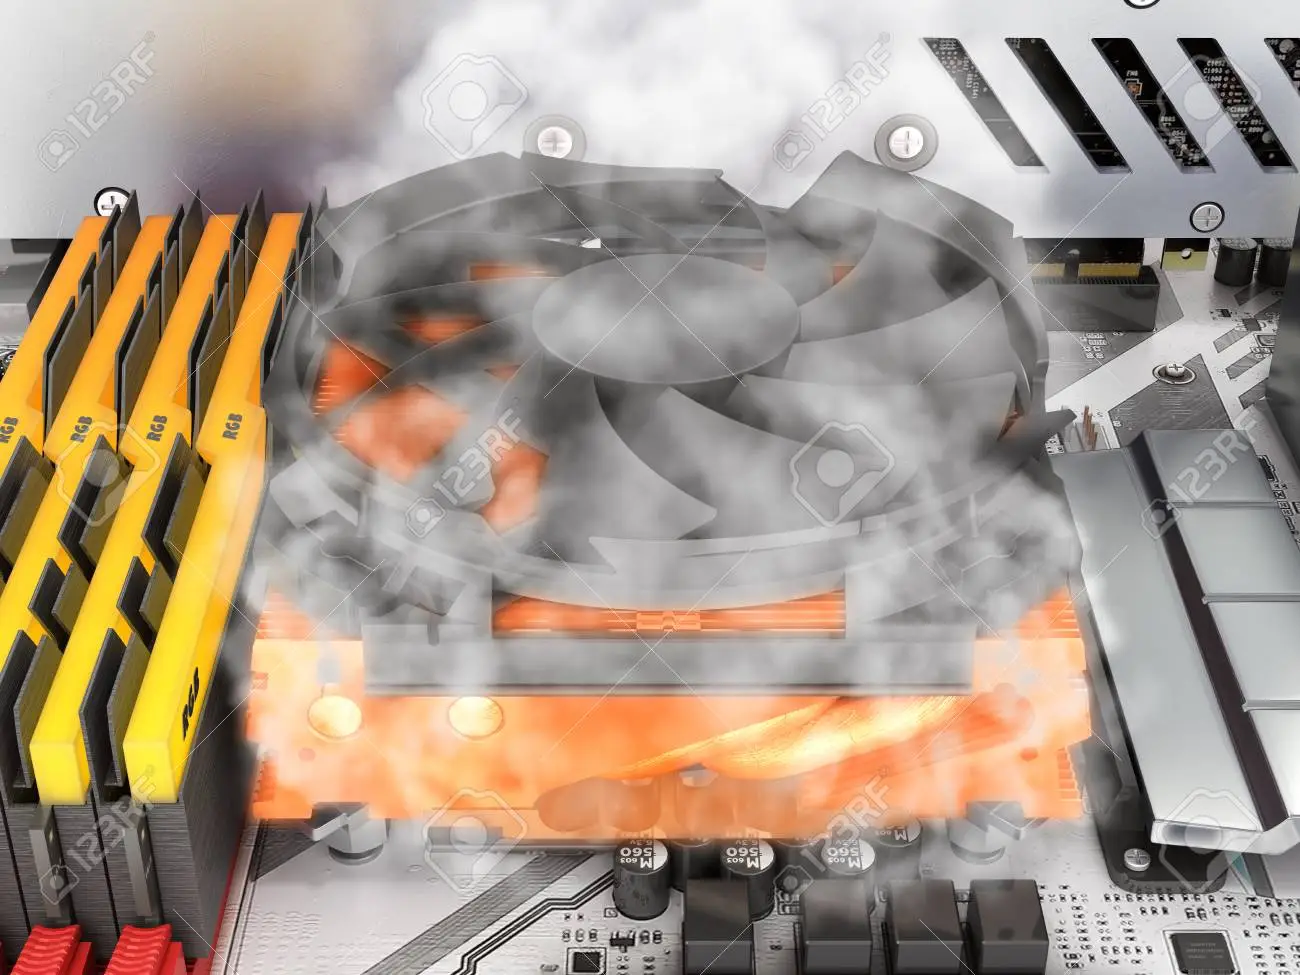 5 Reasons Why Cooling is Necessary for Your PC